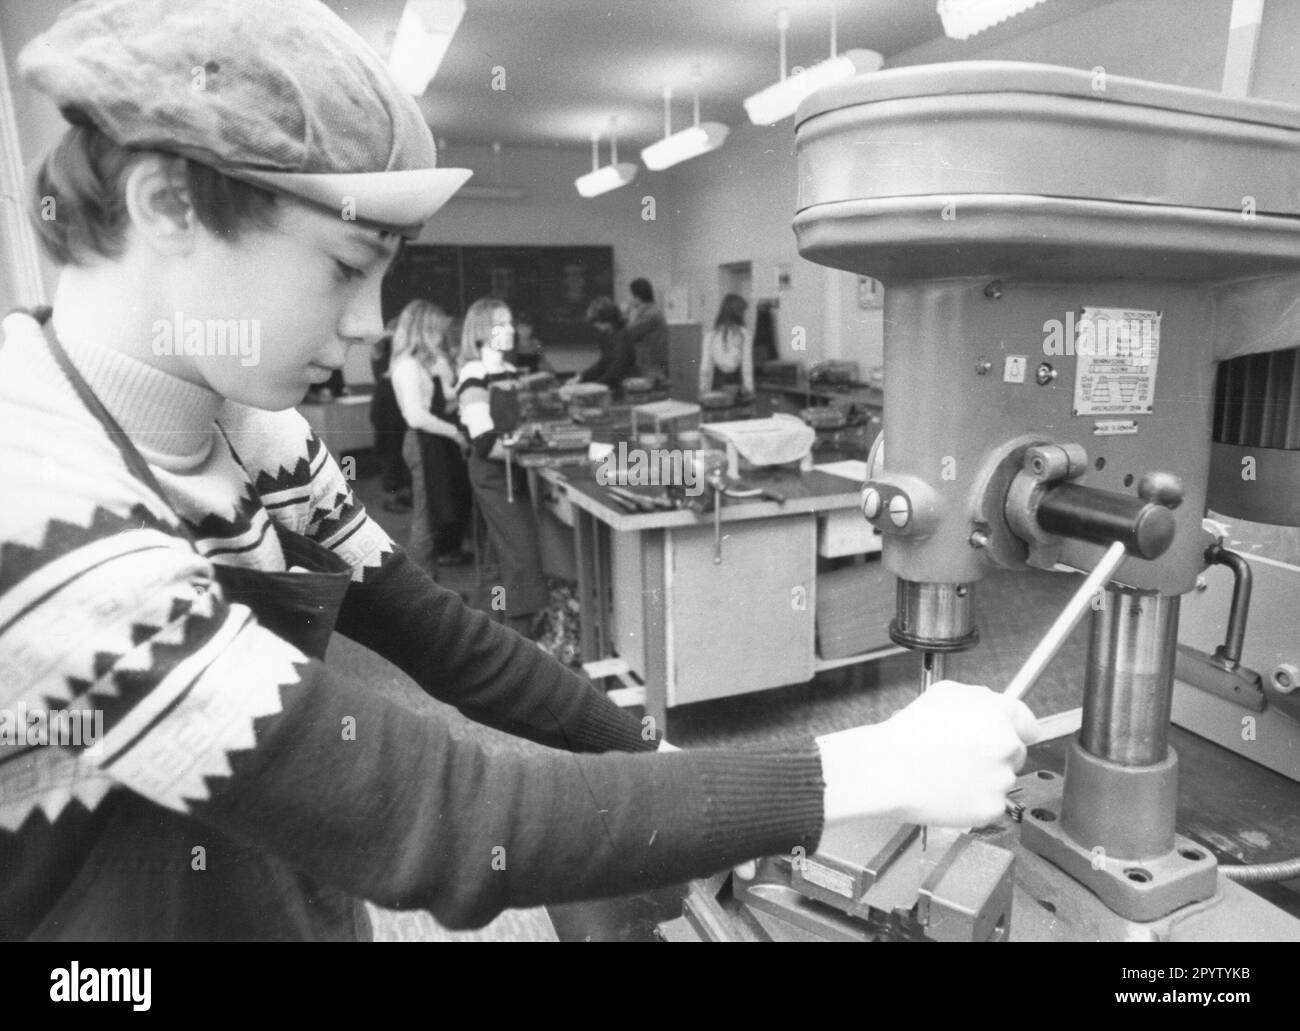 Polytechnic lessons (PA) for pupils in the IFA car plant Ludwigsfelde.pupils at the workbench.truck W50.GDR-operations. Photo: MAZ/Dieter Lange,02.11.1982 [automated translation] Stock Photo